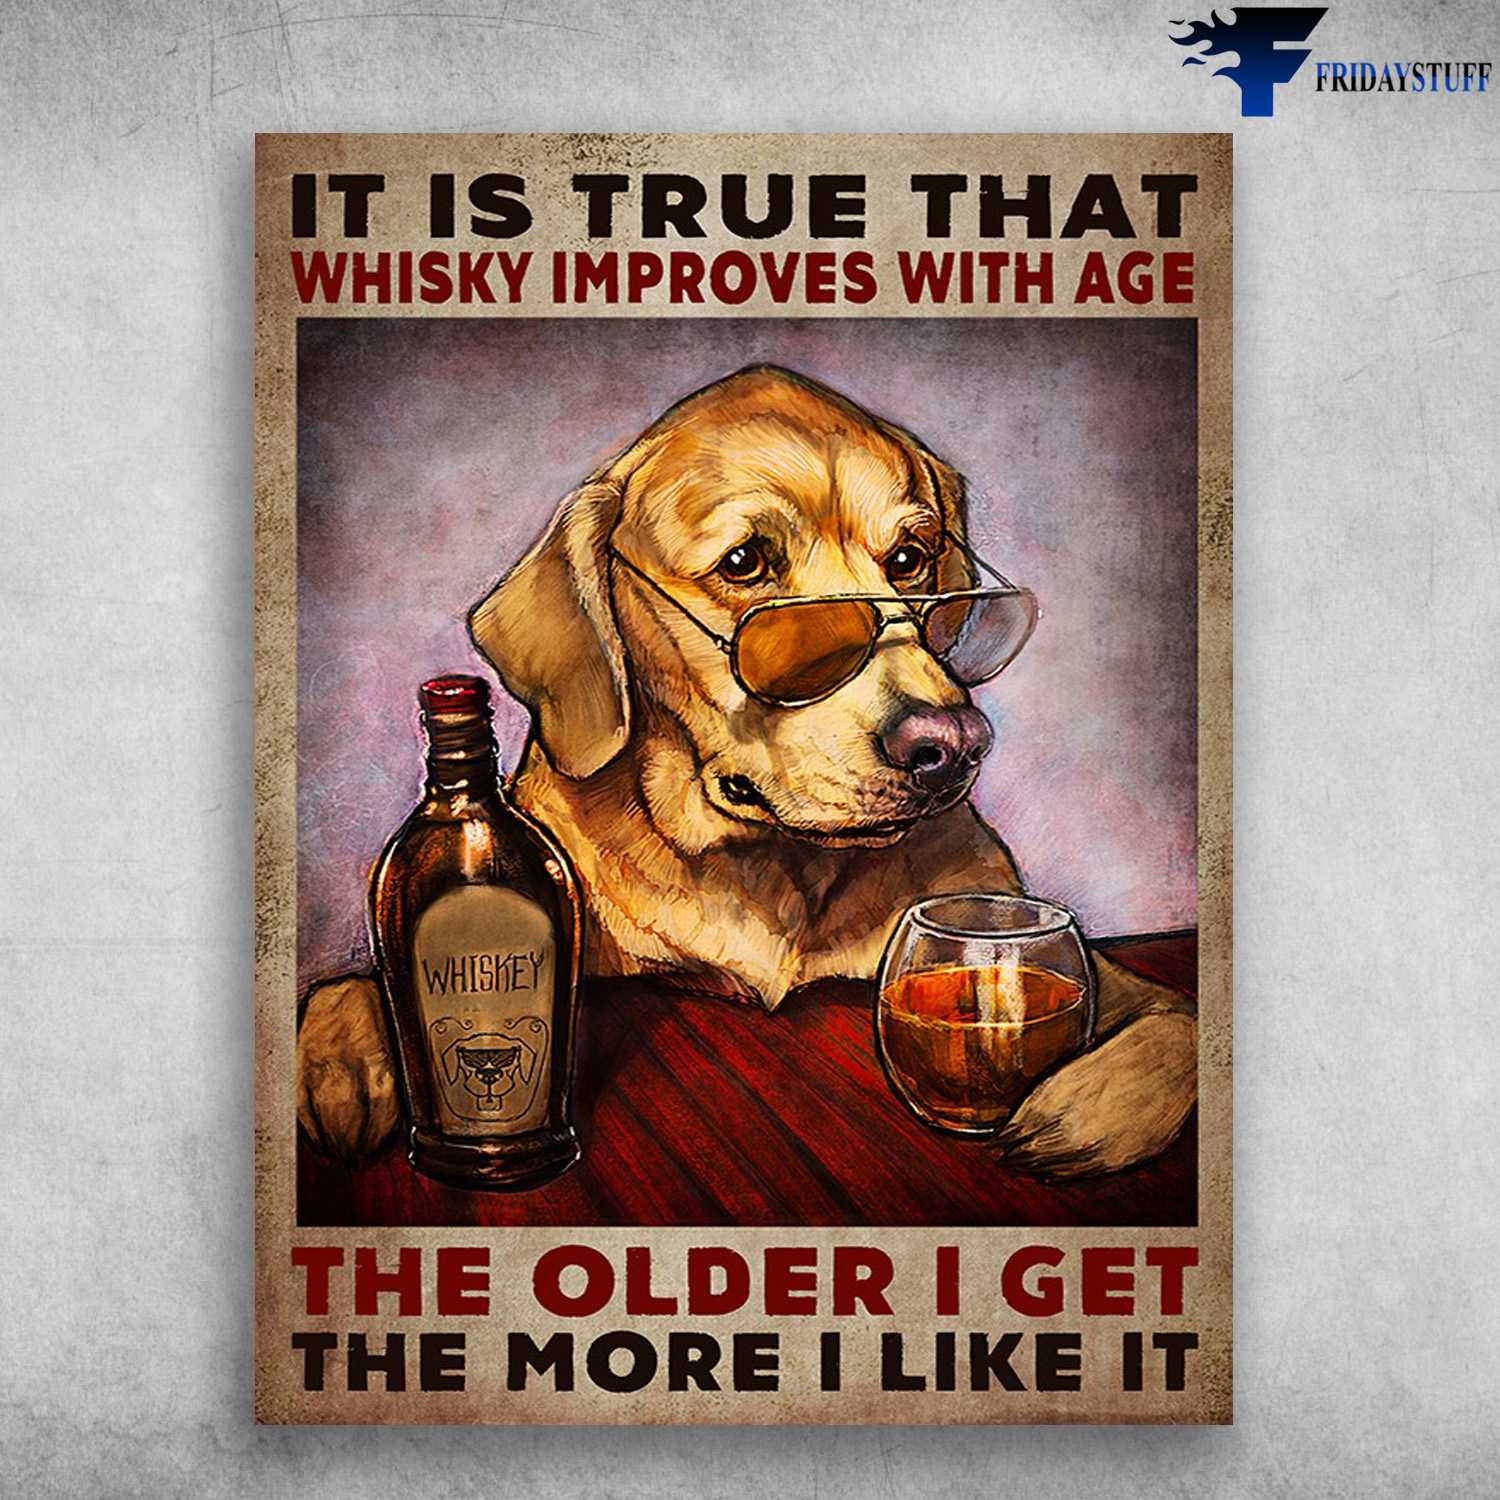 Dod And Wine, Dog Lover - It Is True That, Whisky Improves With Age, The Older I Get, The More I Like It, Whiskey Dog